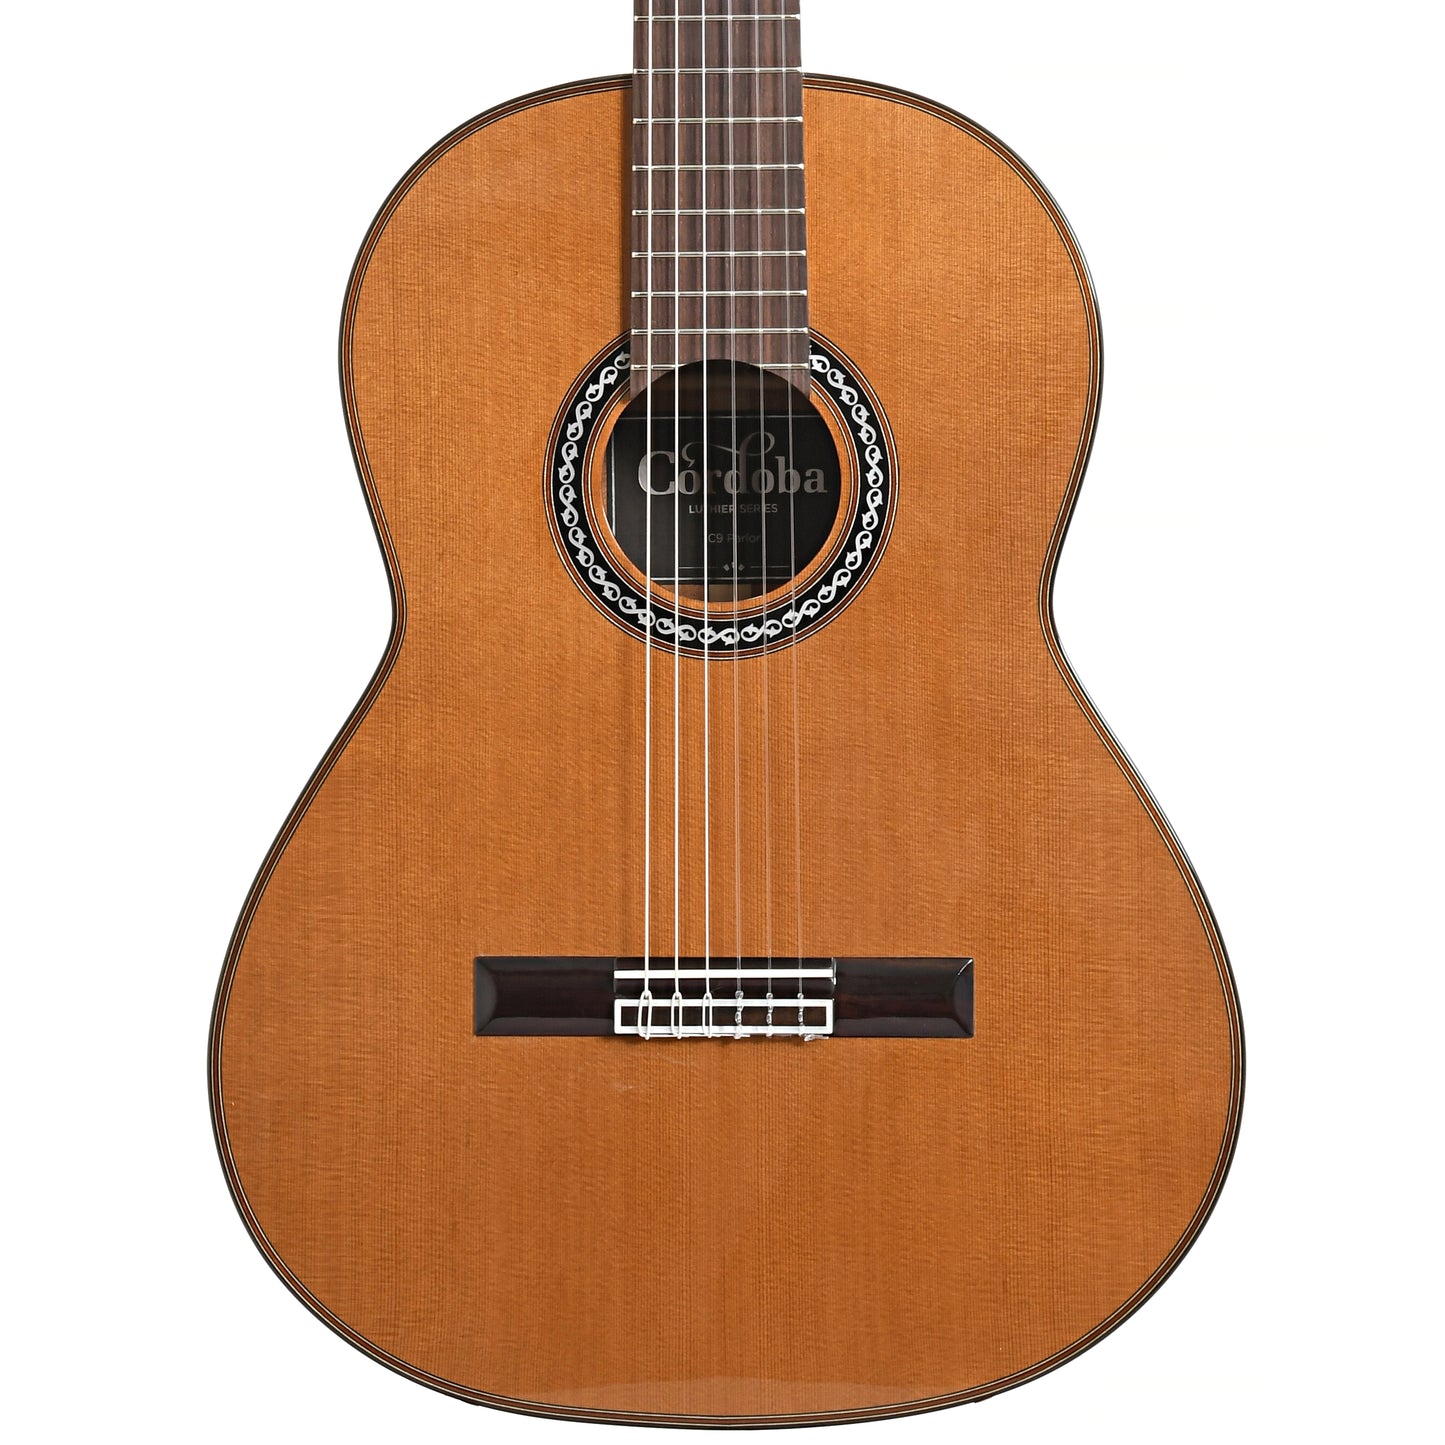 Image 2 of Cordoba C9 Parlor Classical Guitar and Case - SKU# CORC9D : Product Type Classical & Flamenco Guitars : Elderly Instruments